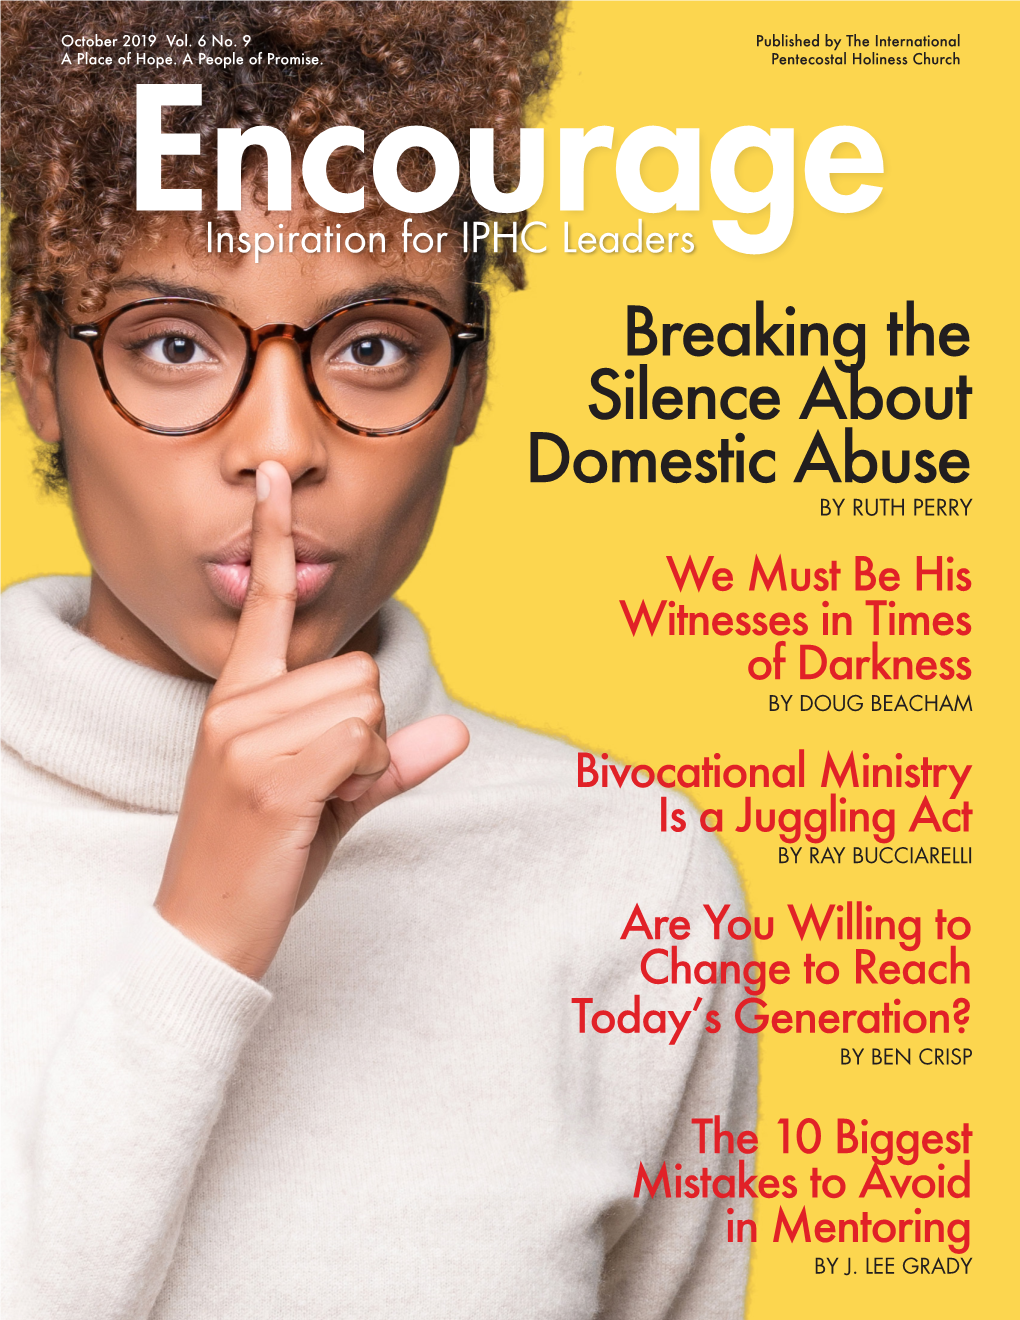 Breaking the Silence About Domestic Abuse